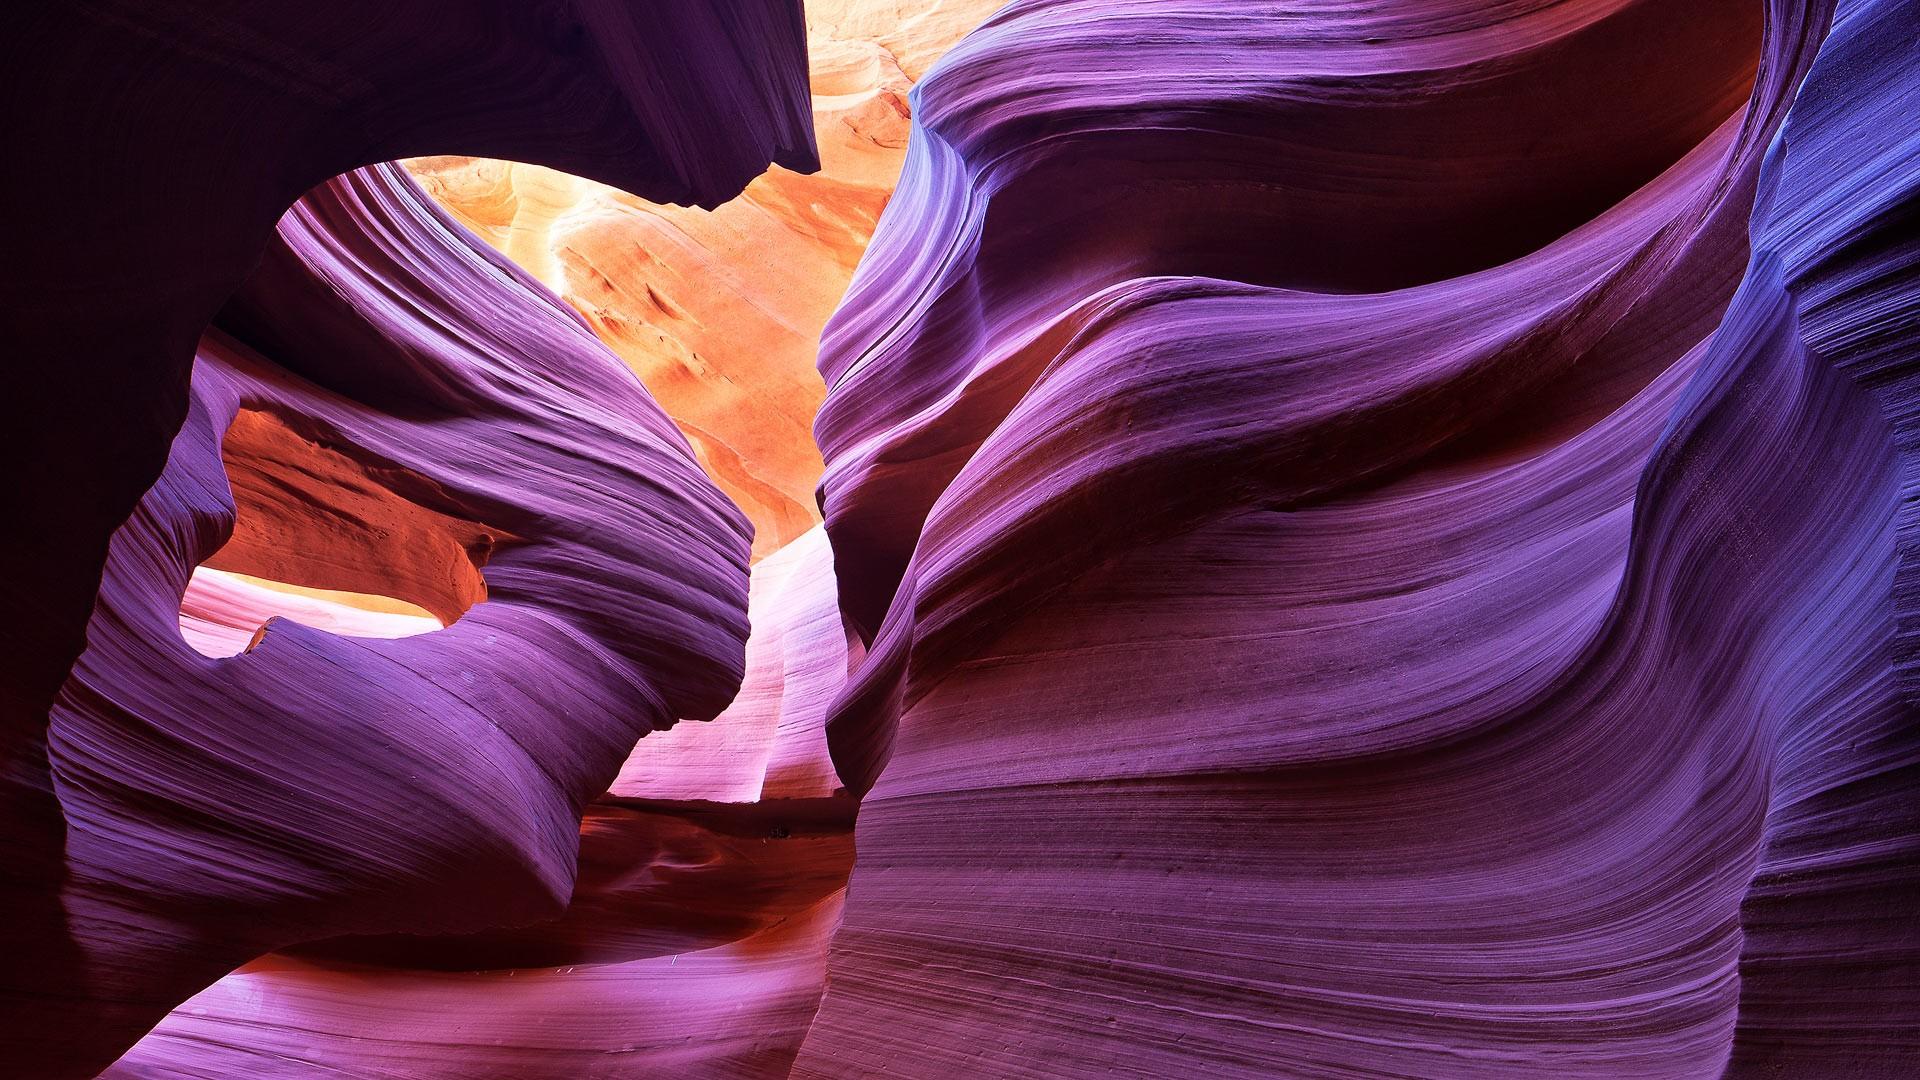 1920x1080 antelope canyon nature wallpaper and background